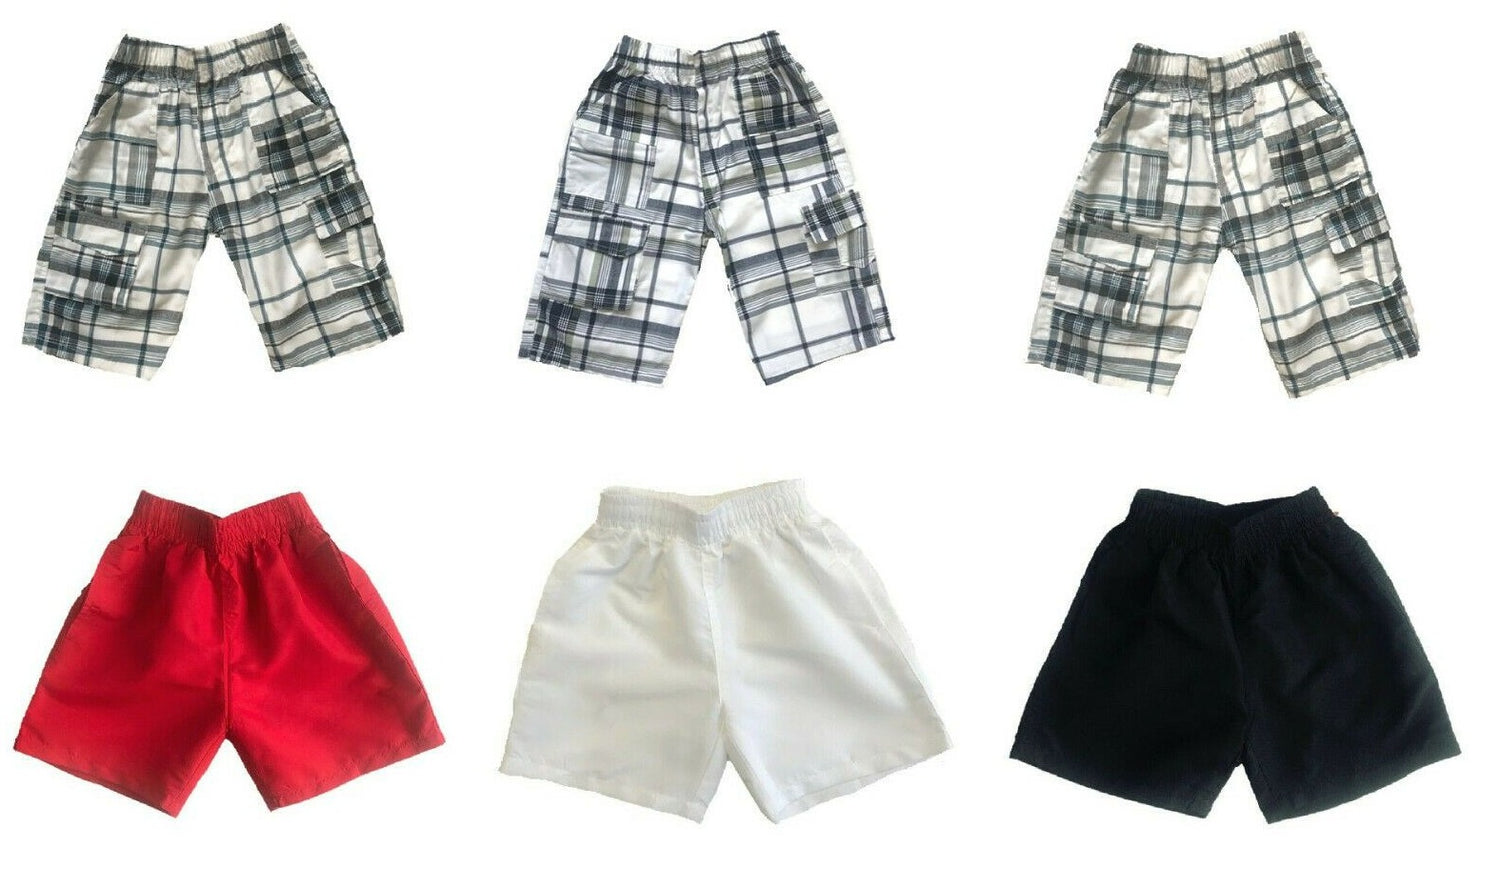 Boys Swimming Shorts In Multiple Designs, Sizes & Colours. The Plain Shorts Are Perfect For School Swimming Lessons. Other Designs Available Are Perfect For Holidays Or Relaxing Days In The Garden. Sizes 3-16 Available.